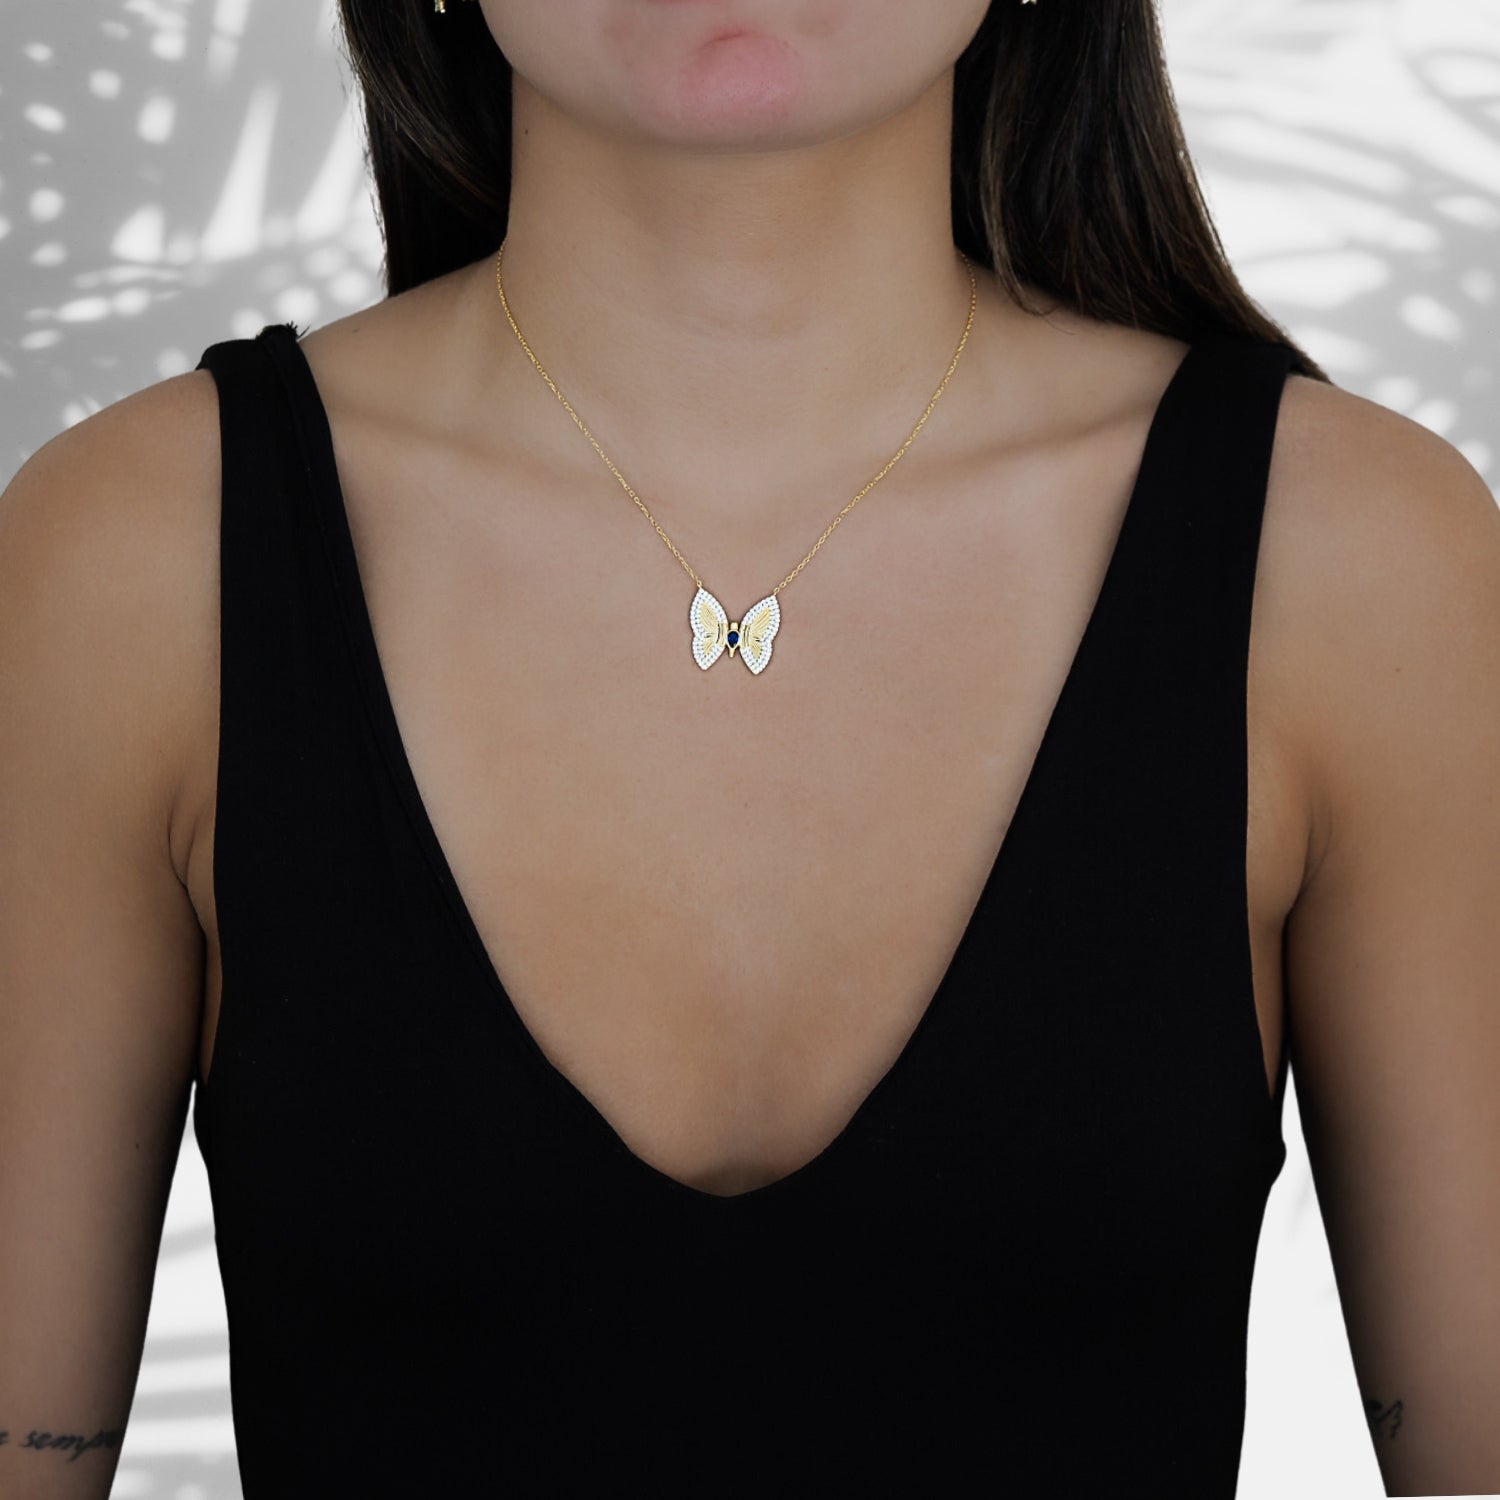 Model wearing the Gold Sparkly Hope Butterfly Necklace, symbolizing resilience and embracing the power of hope and transformation.